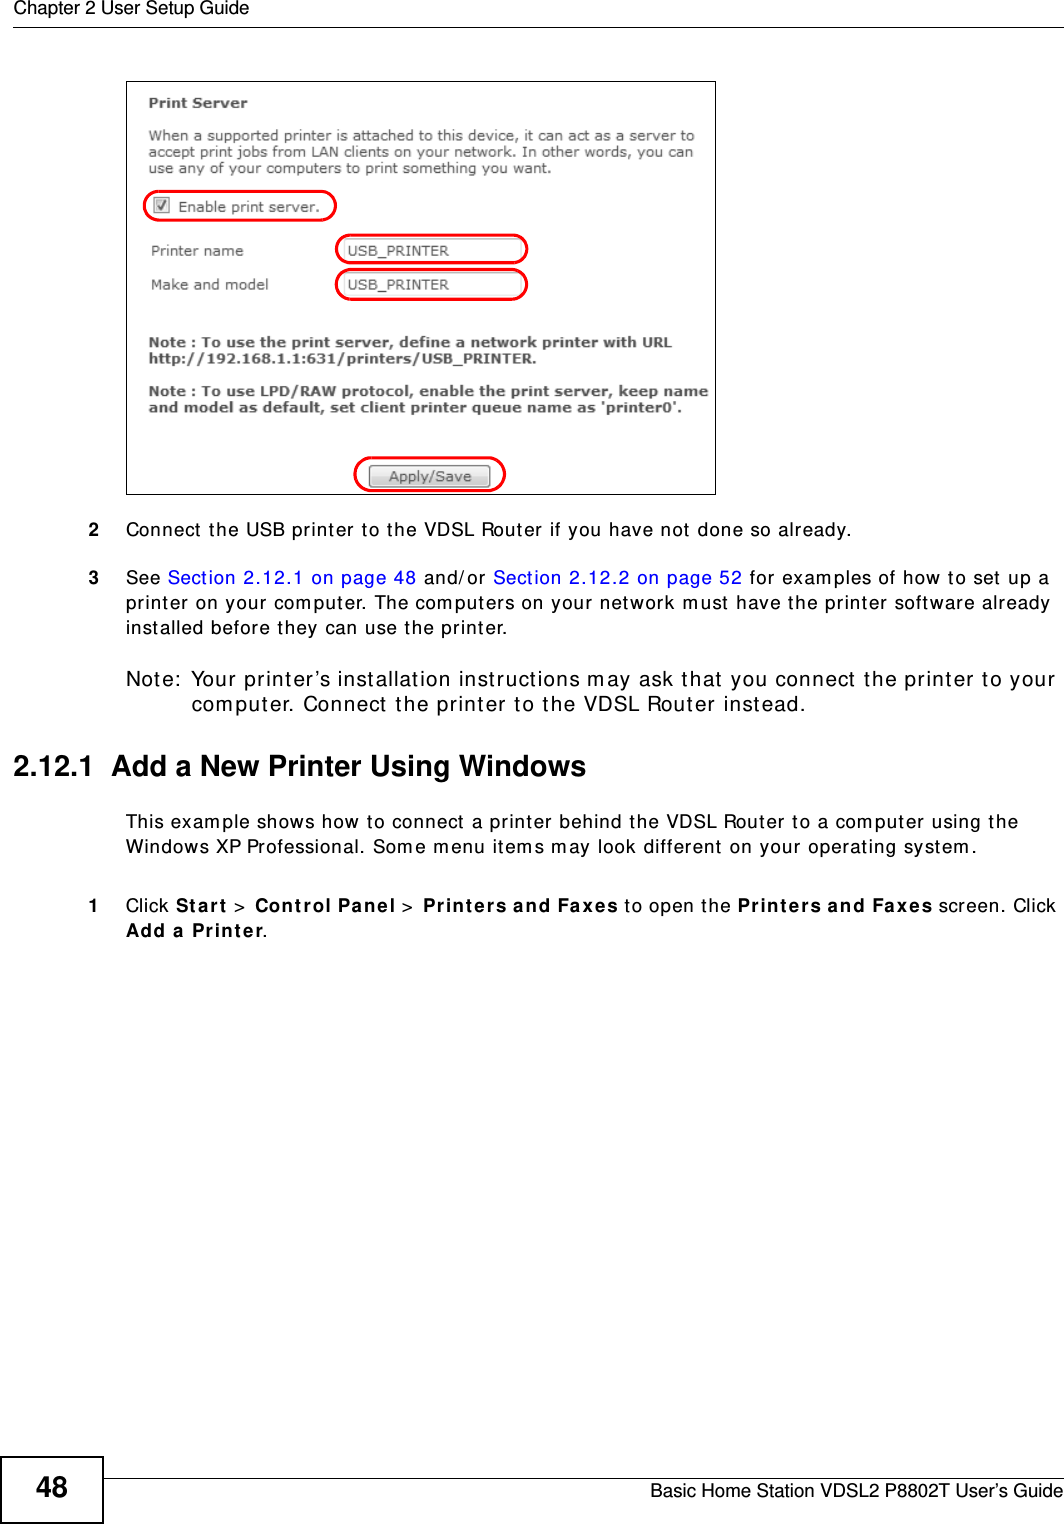 Chapter 2 User Setup GuideBasic Home Station VDSL2 P8802T User’s Guide482Connect  the USB printer to the VDSL Router if you have not done so already.3See Sect ion 2.12.1 on page 48 and/ or Sect ion 2.12.2 on page 52 for exam ples of how to set  up a print er  on your com puter. The com put er s on your net work m ust  have t he printer software already inst alled befor e they can use t he print er.Note:  Your print er ’s inst allat ion instructions m ay ask that you connect  t he printer to your com put er. Connect t he printer to t he VDSL Router inst ead.2.12.1  Add a New Printer Using WindowsThis exam ple shows how to connect a printer behind t he VDSL Router to a comput er using the Windows XP Professional. Som e m enu item s m ay look different on your operat ing syst em .1Click St art &gt; Control Pa ne l &gt; Print ers a nd Fa xes t o open t he Prin t ers a nd Fa xes screen. Click Add a Print e r. 